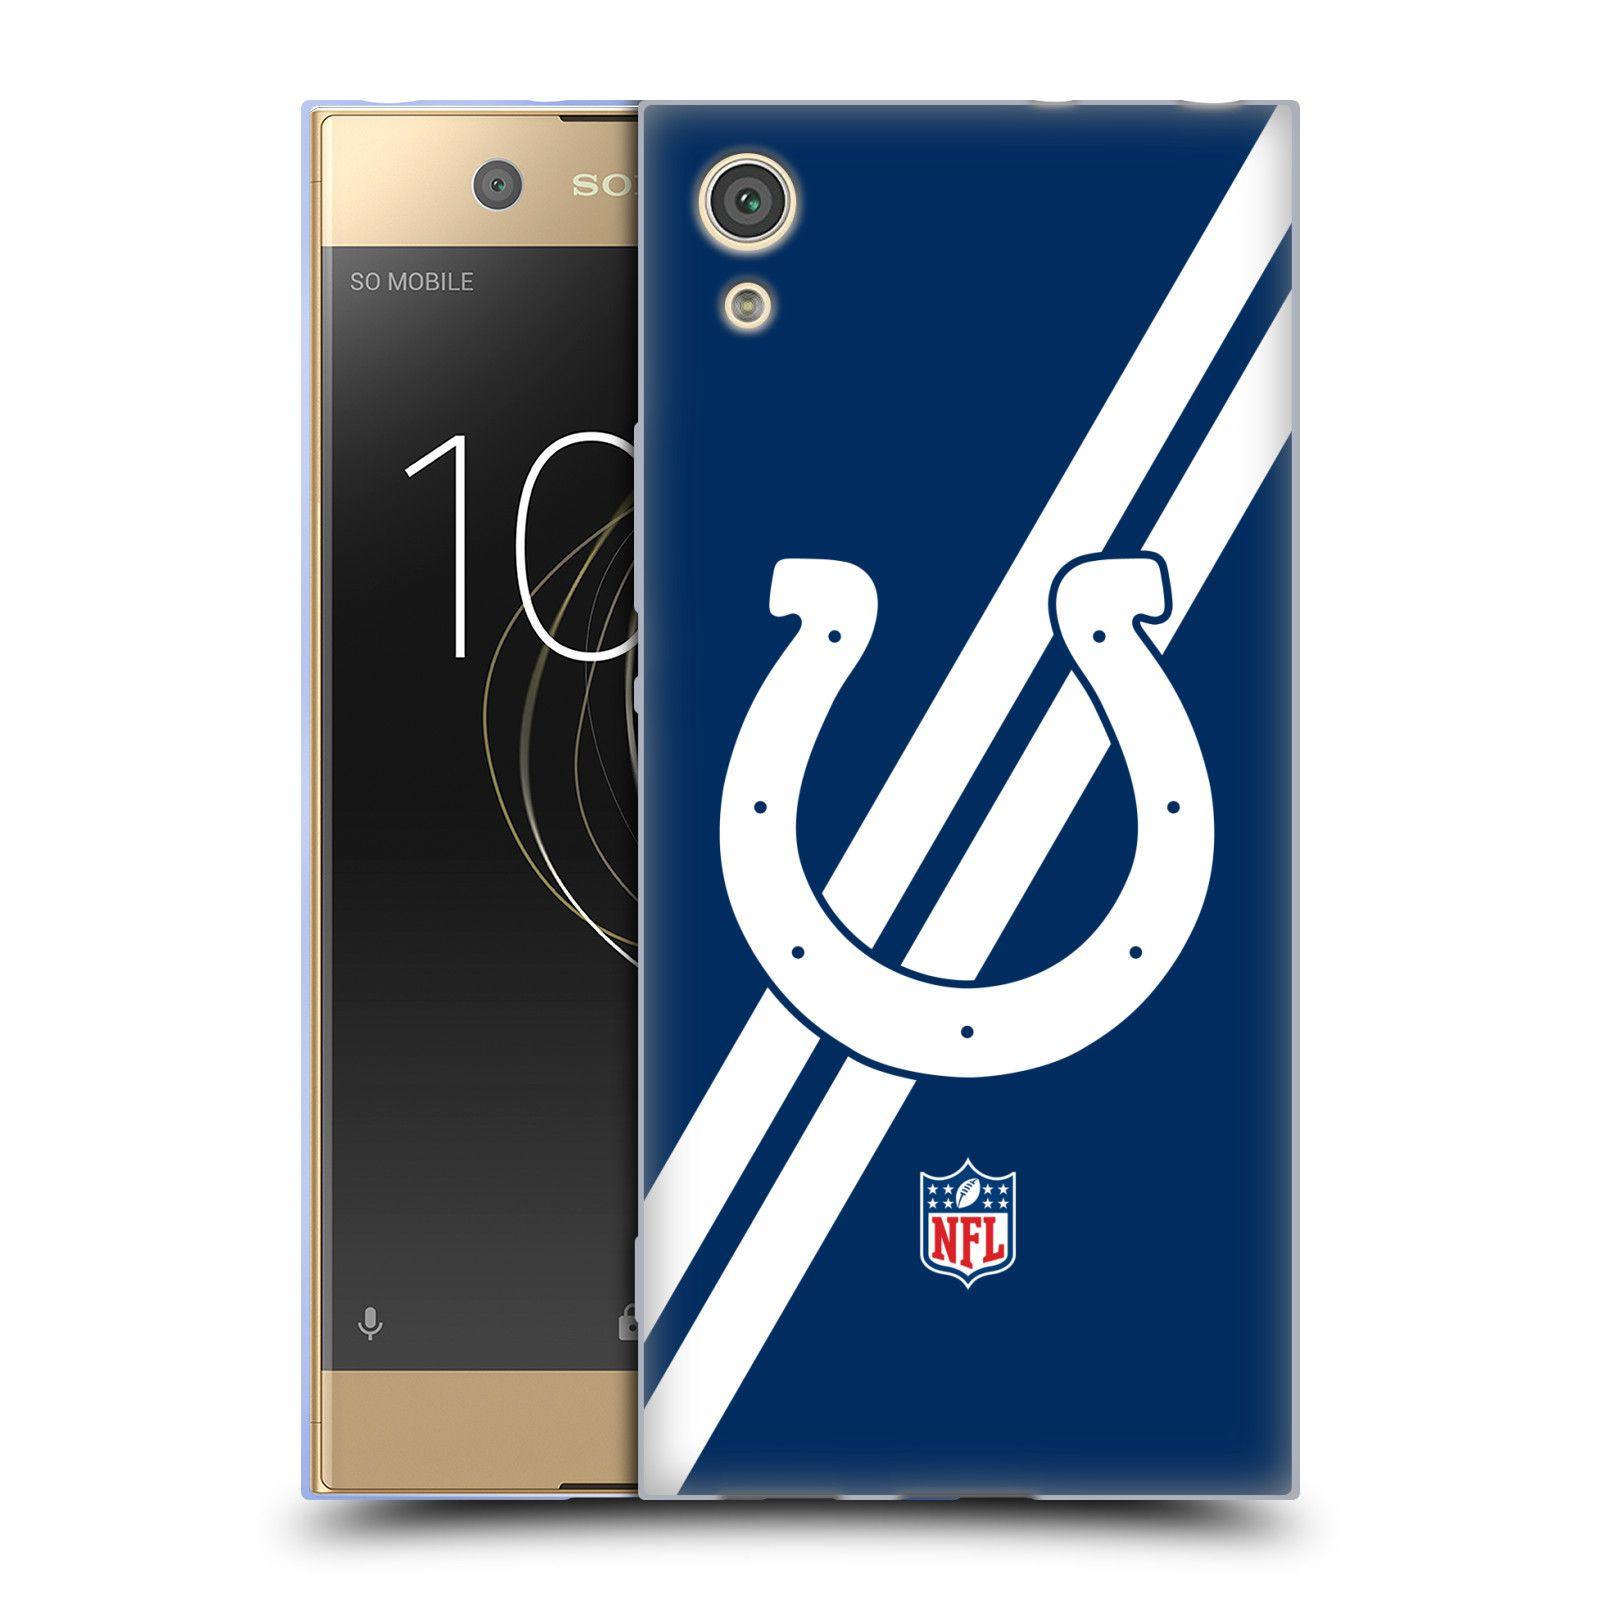 Sony Phone Logo - OFFICIAL NFL INDIANAPOLIS COLTS LOGO SOFT GEL CASE FOR SONY PHONES 1 ...